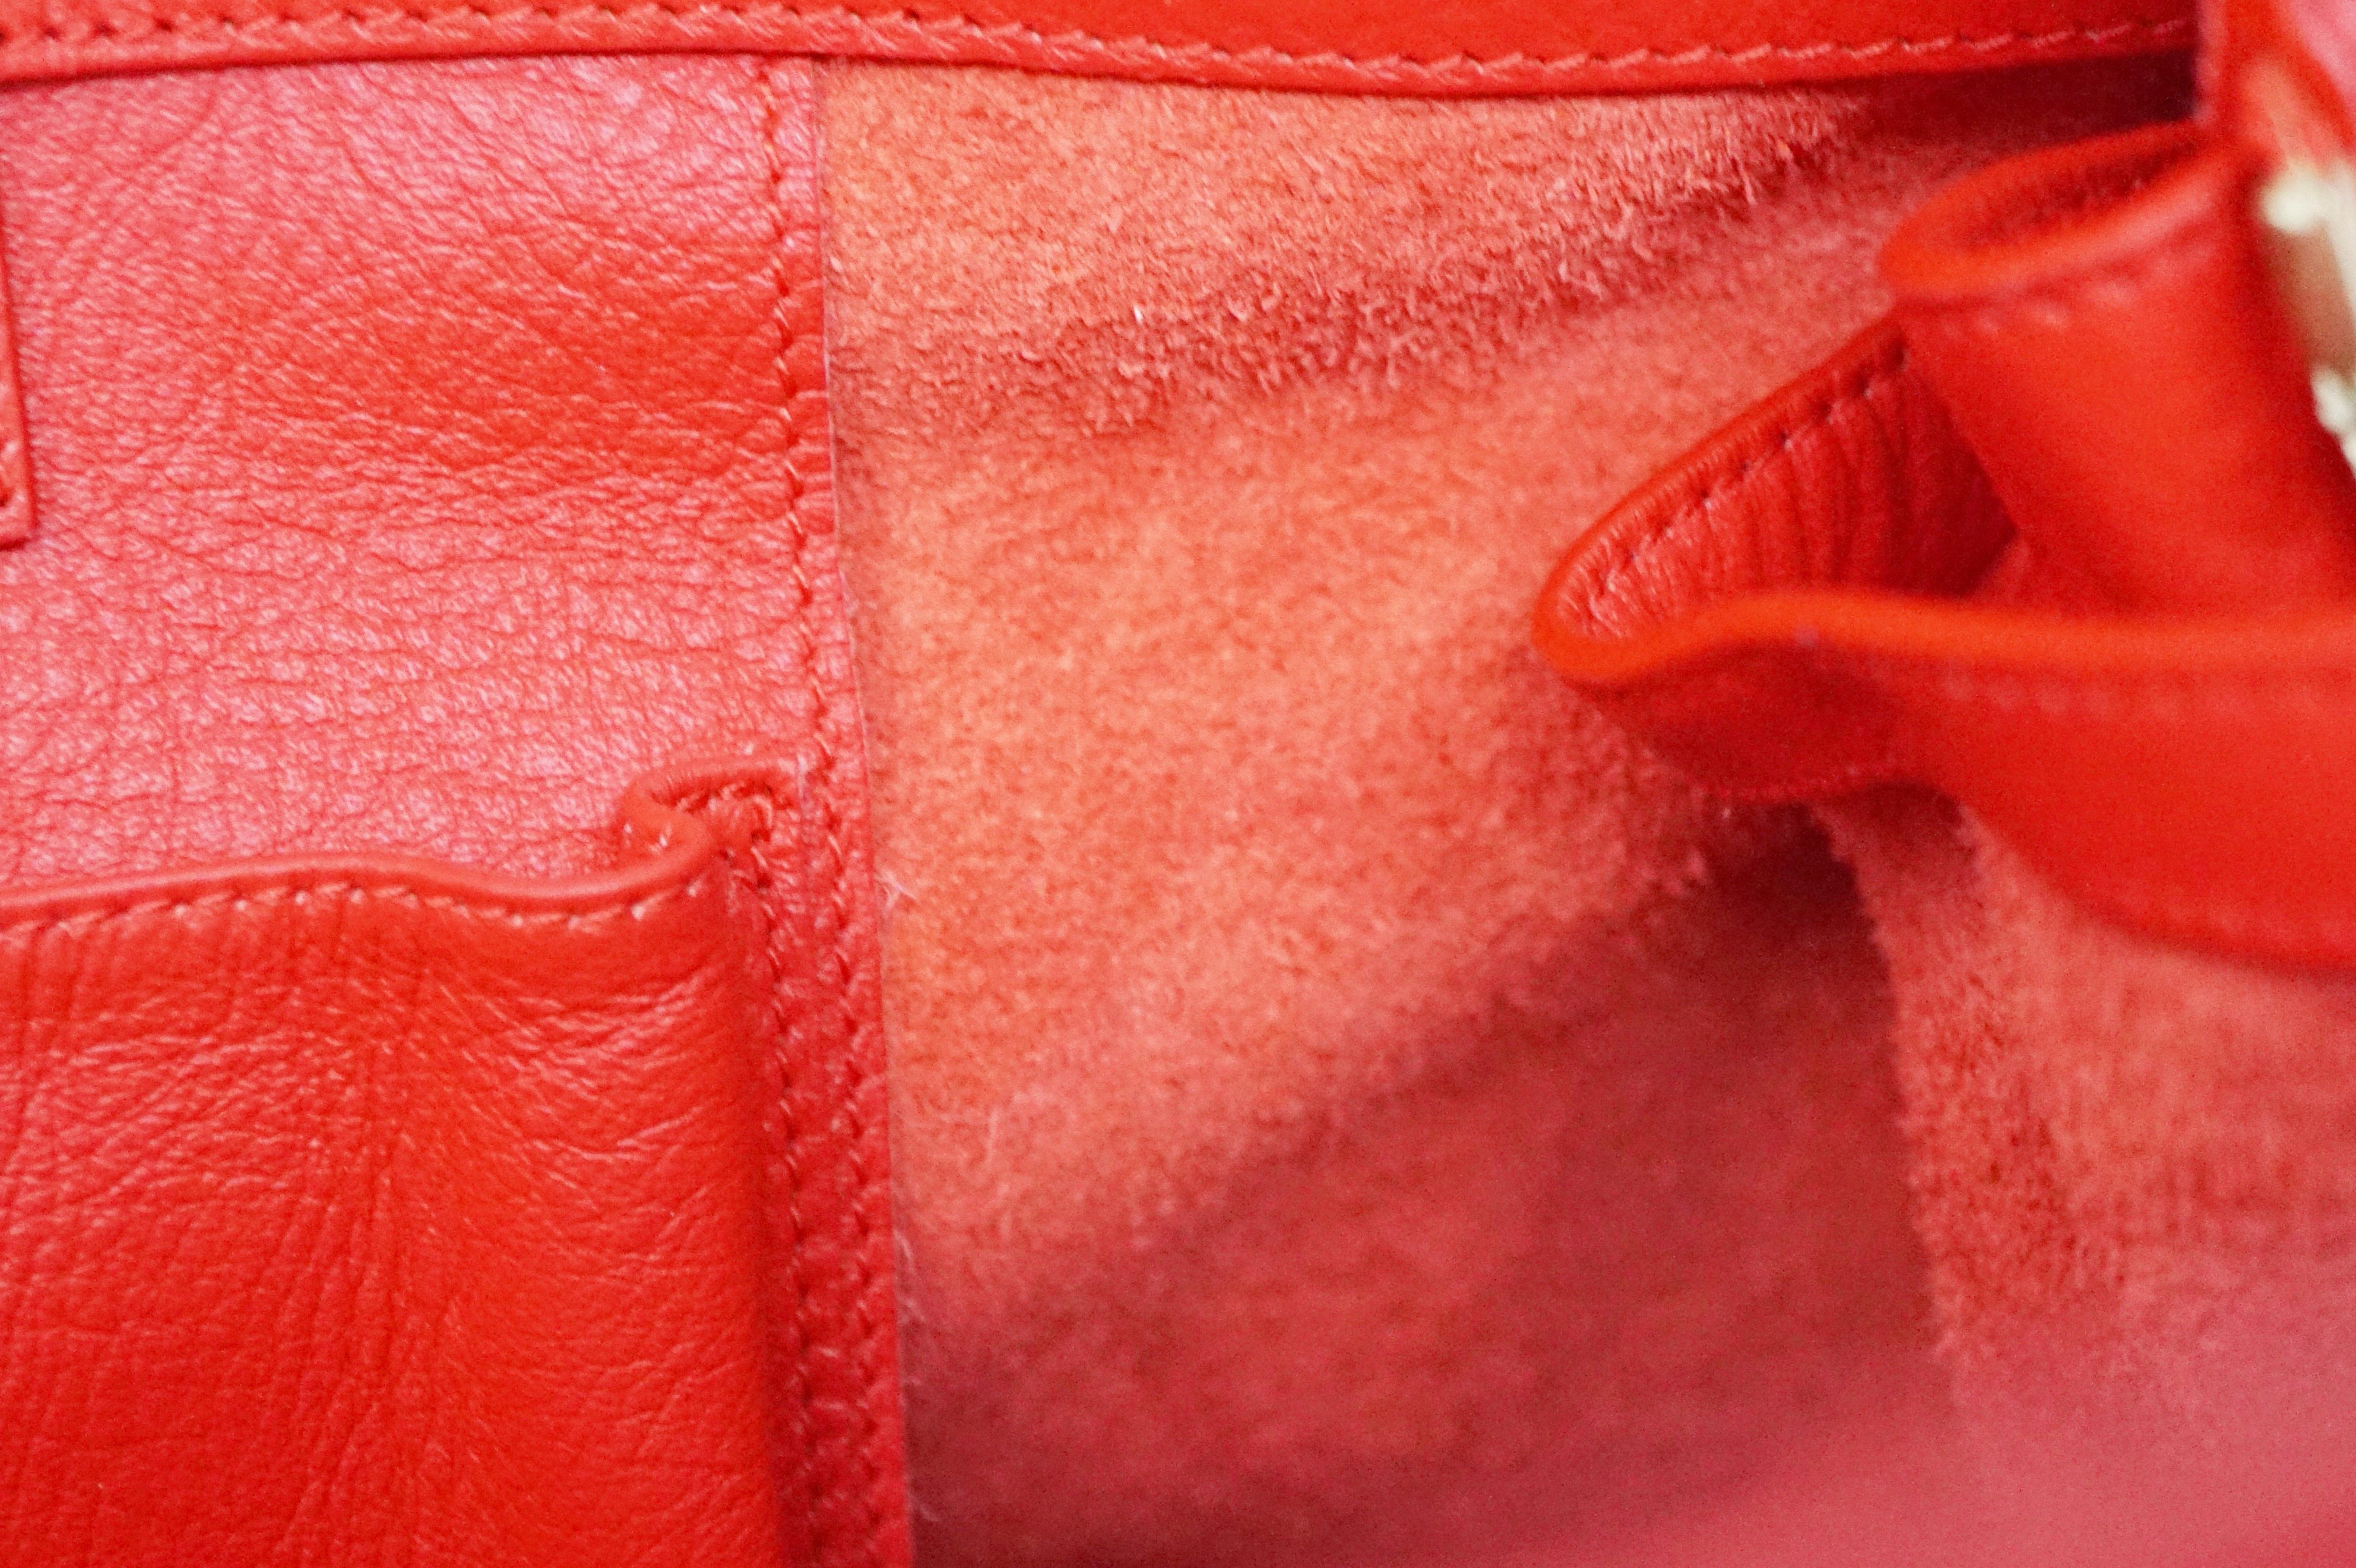 Balenciaga Papier A4 Zip-Around Tote in Red Calfskin Leather, Fall/Winter 2016   6